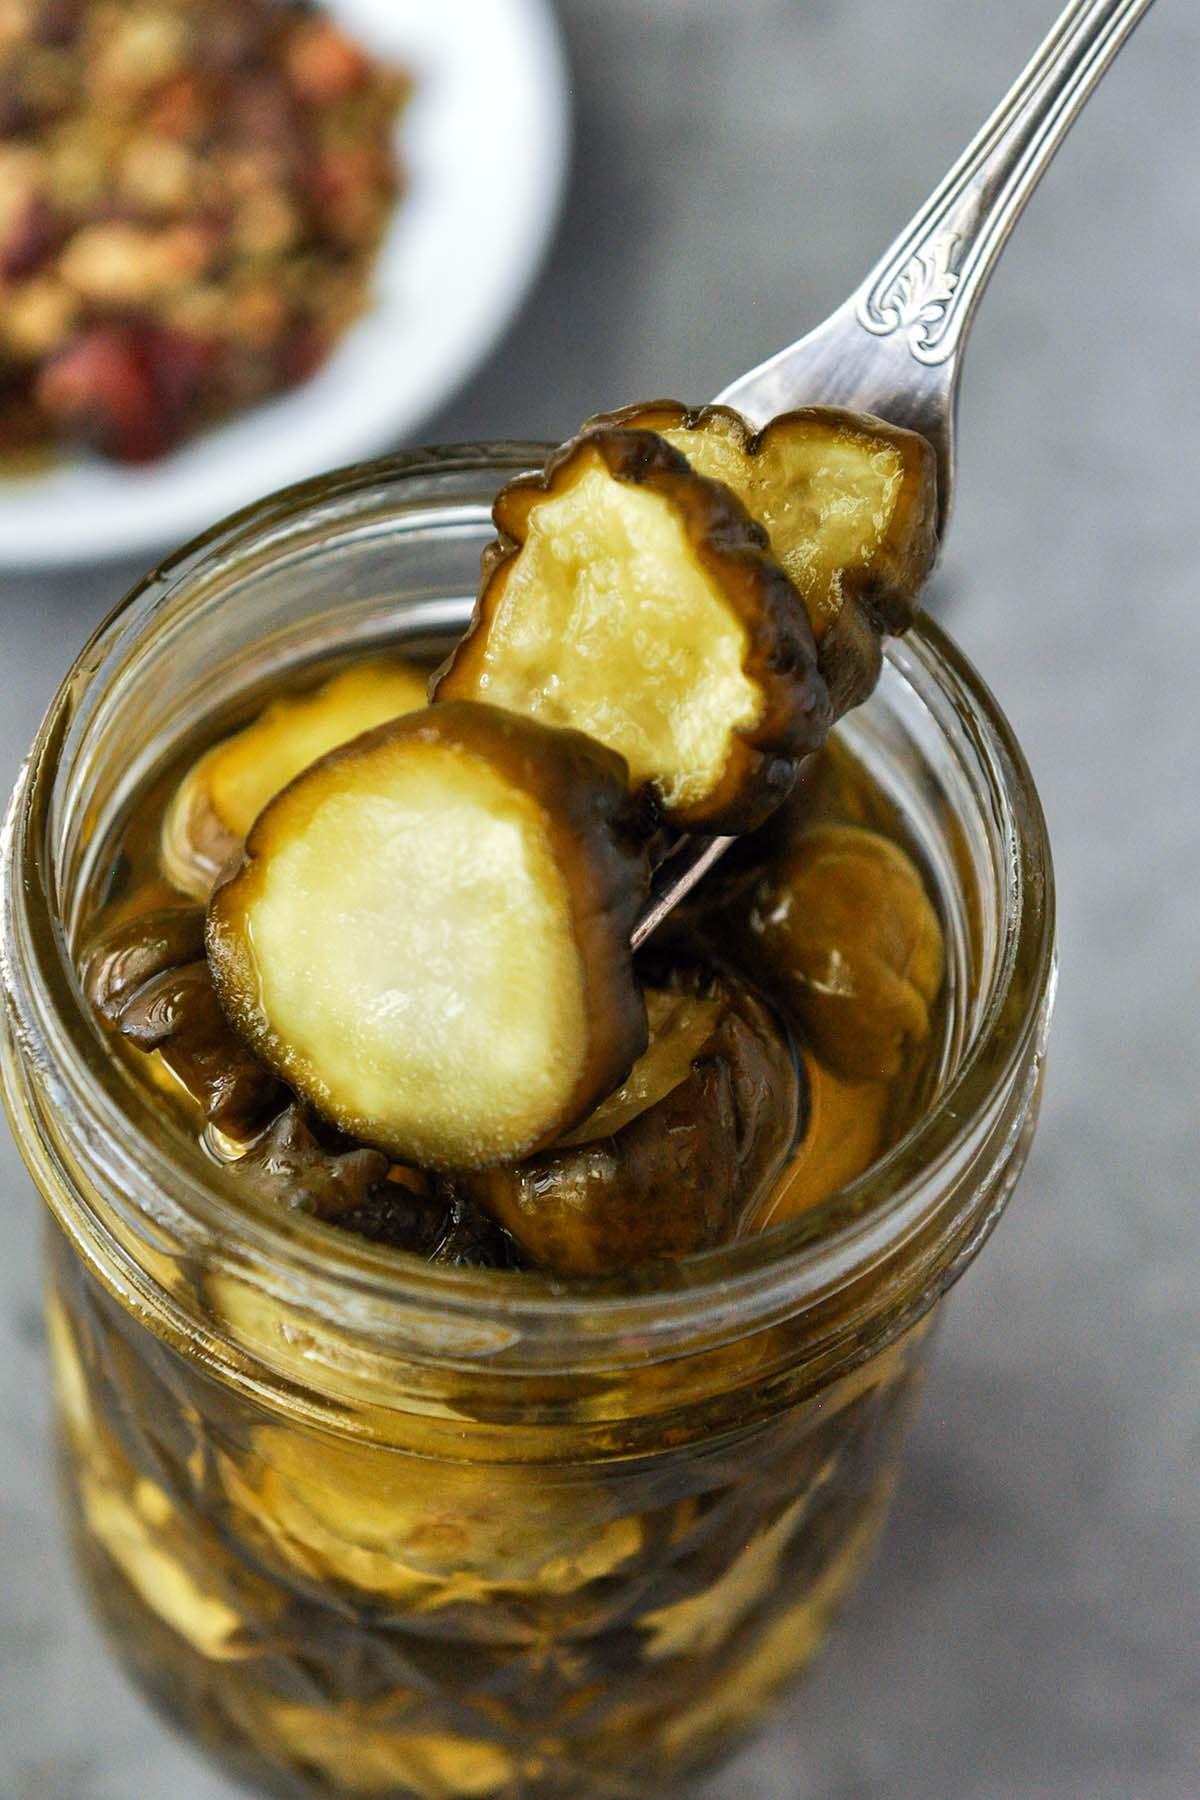 A forkful of candied pickles above the jar.